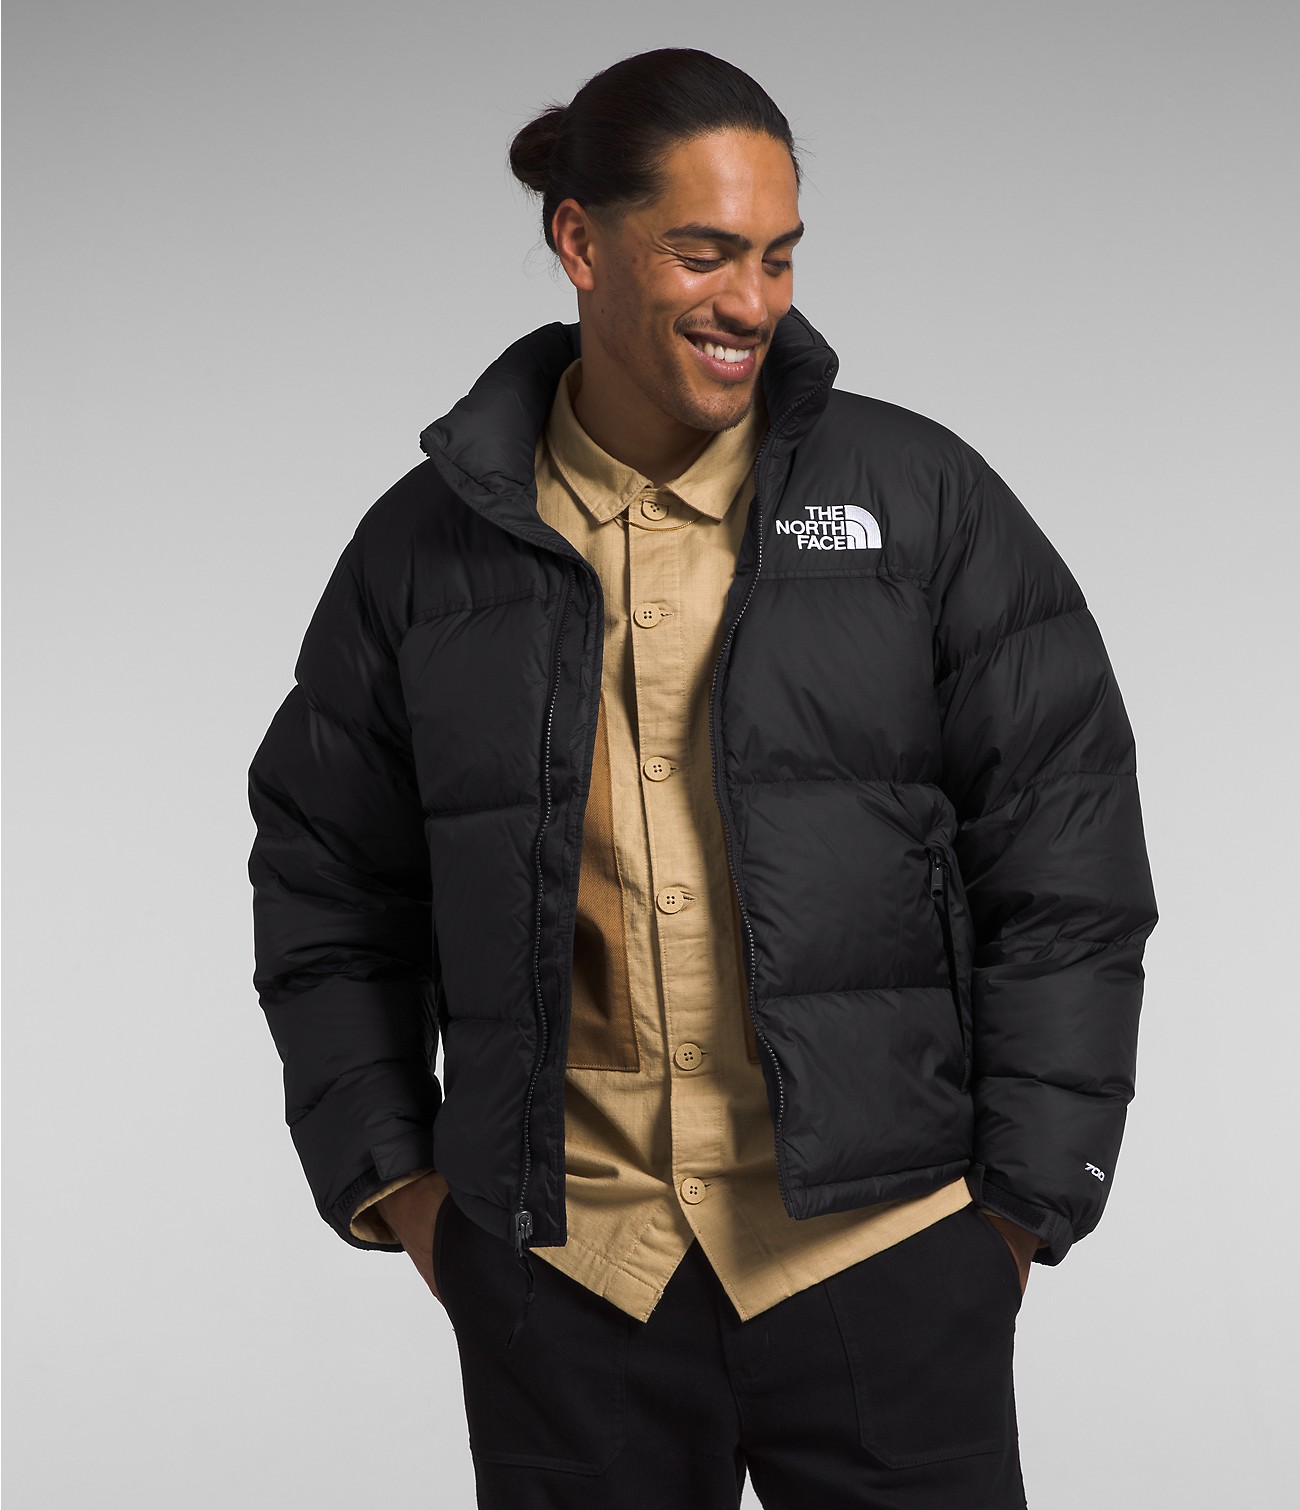 Unlock Wilderness' choice in the Kathmandu Vs North Face comparison, the 1996 Retro Nuptse Jacket by The North Face